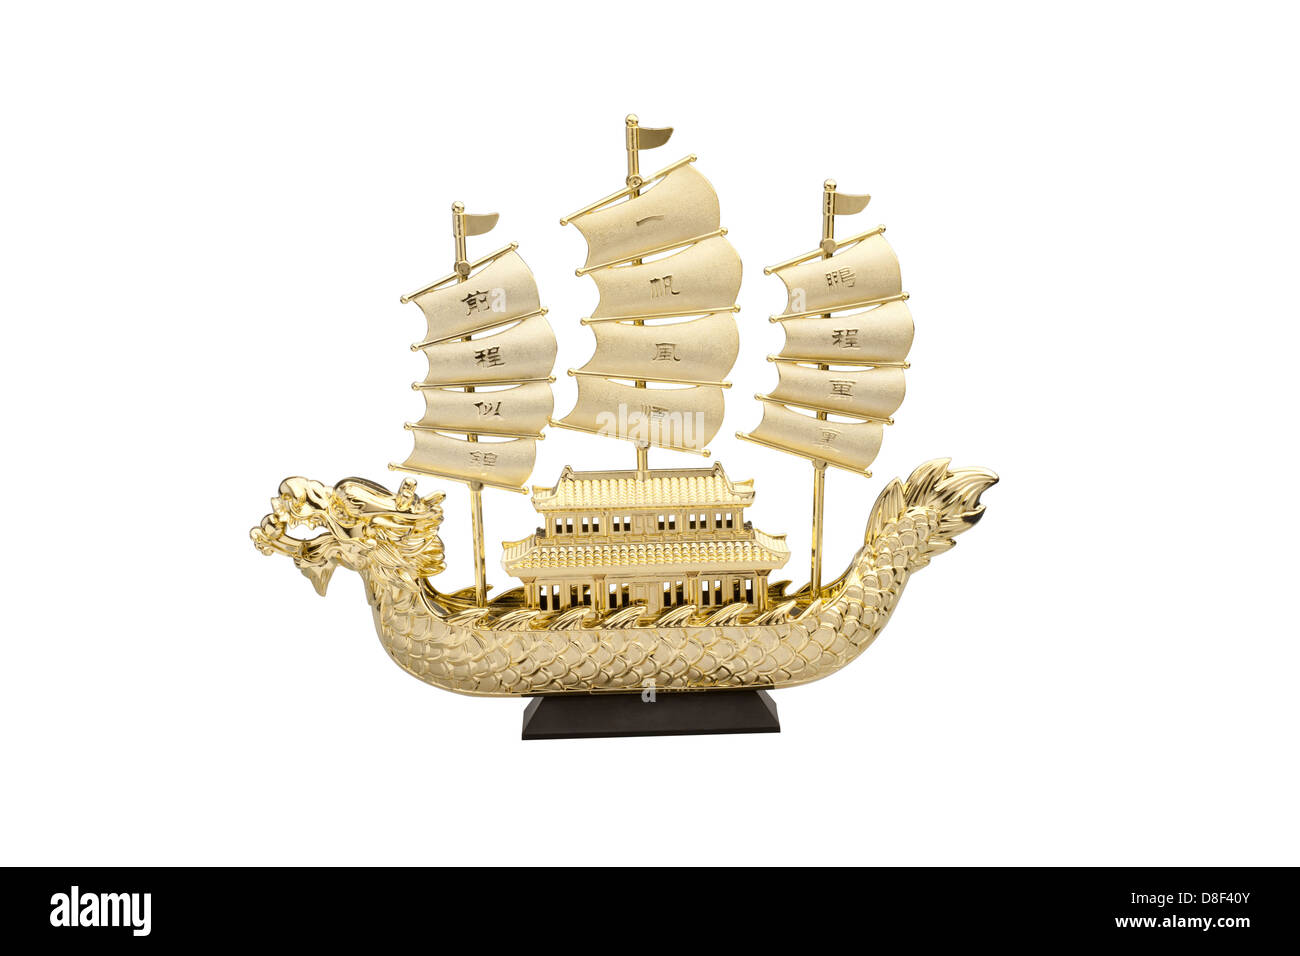 The golden dragon ship the symbol of wealth Stock Photo